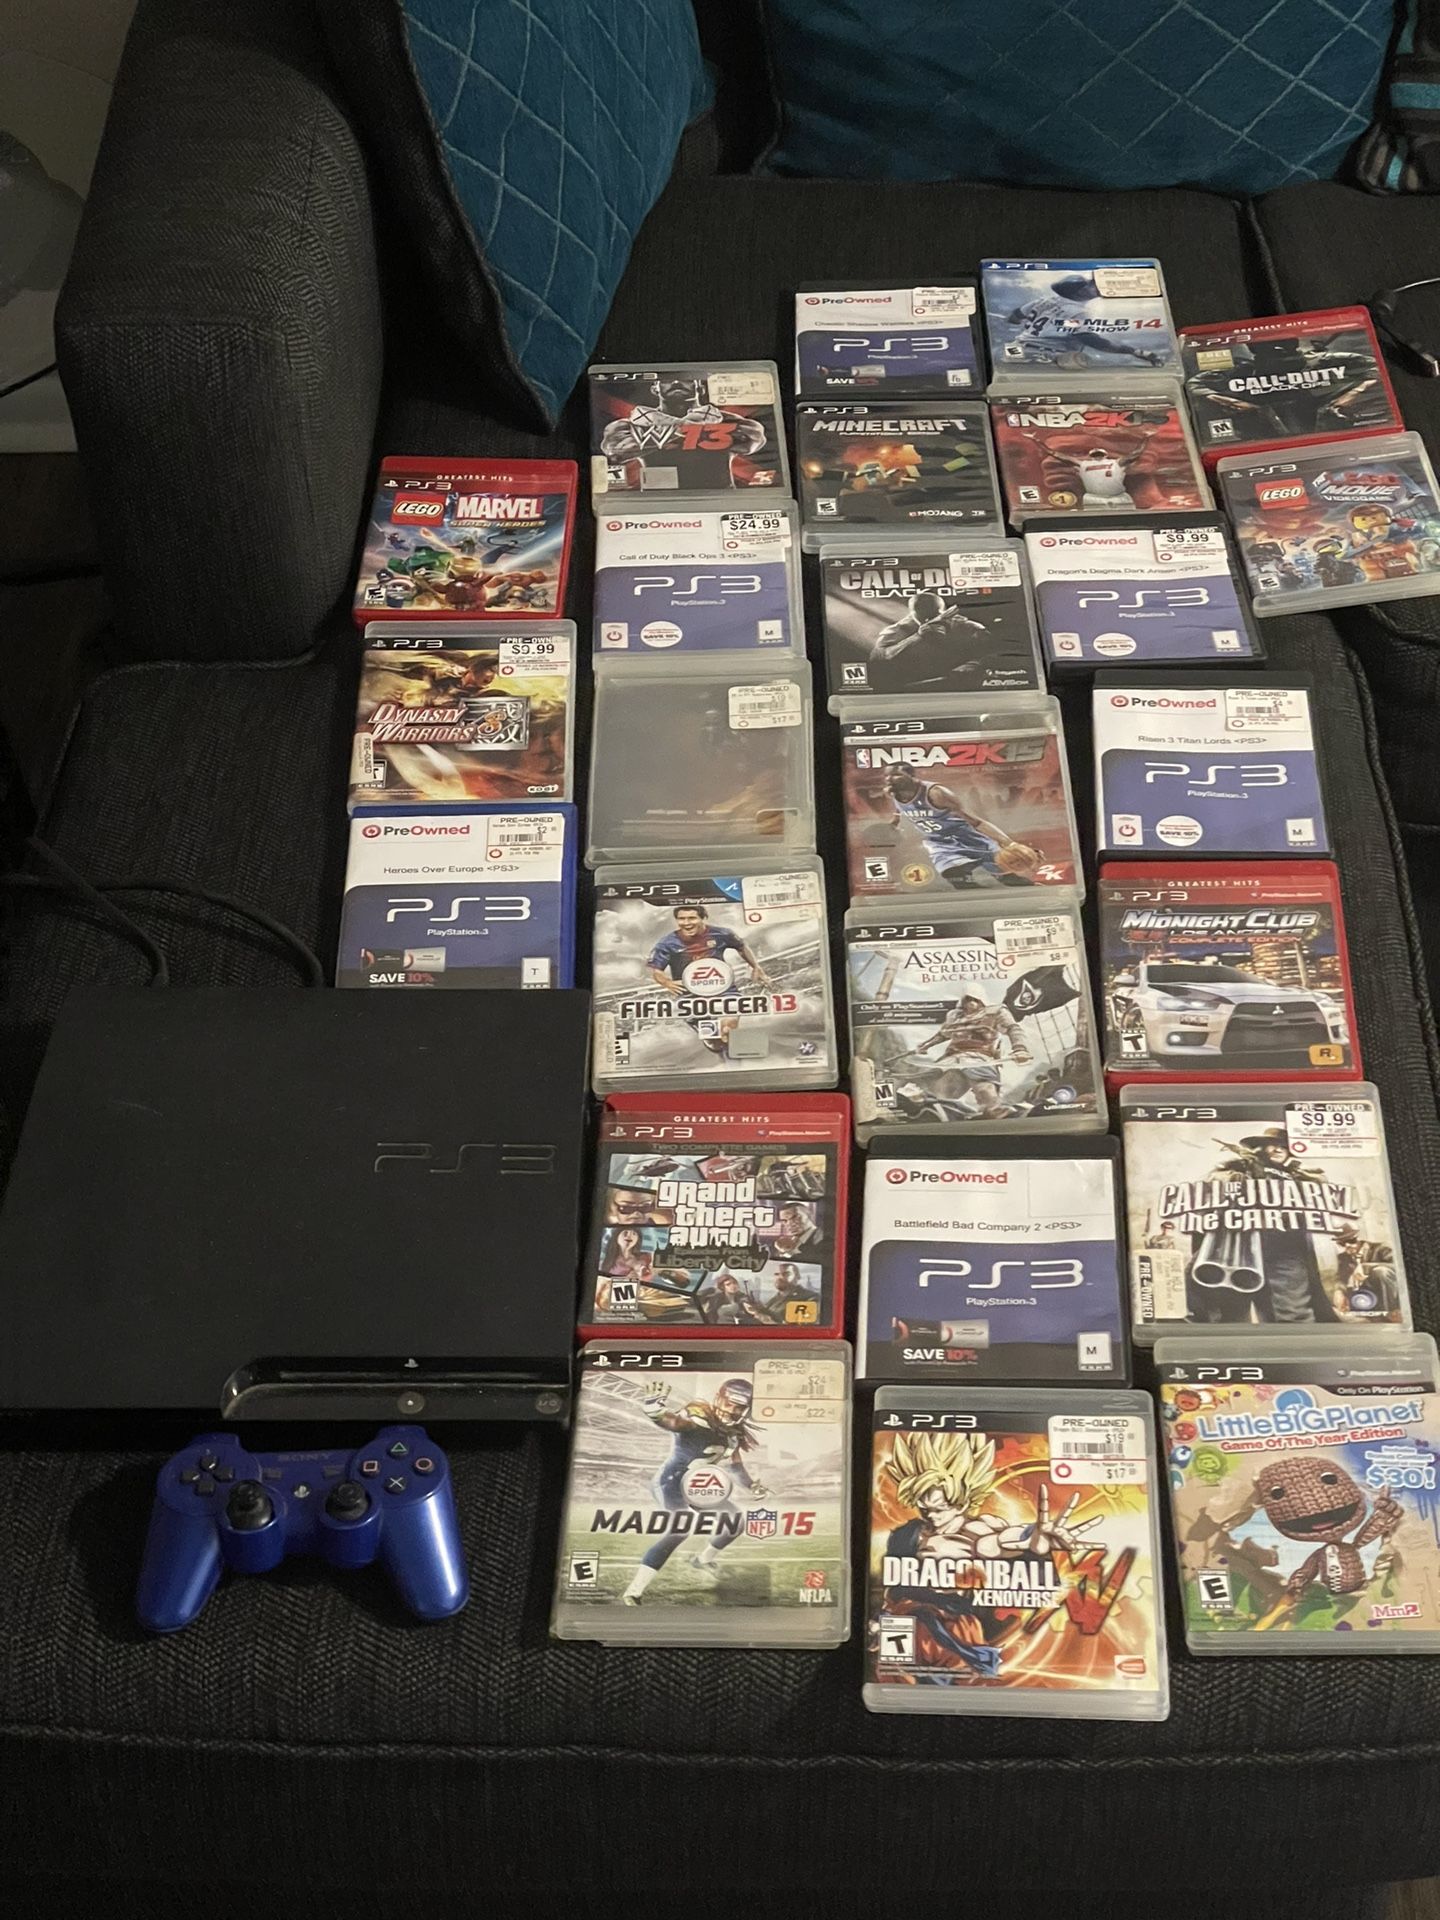 PS3 With 25 Games Included